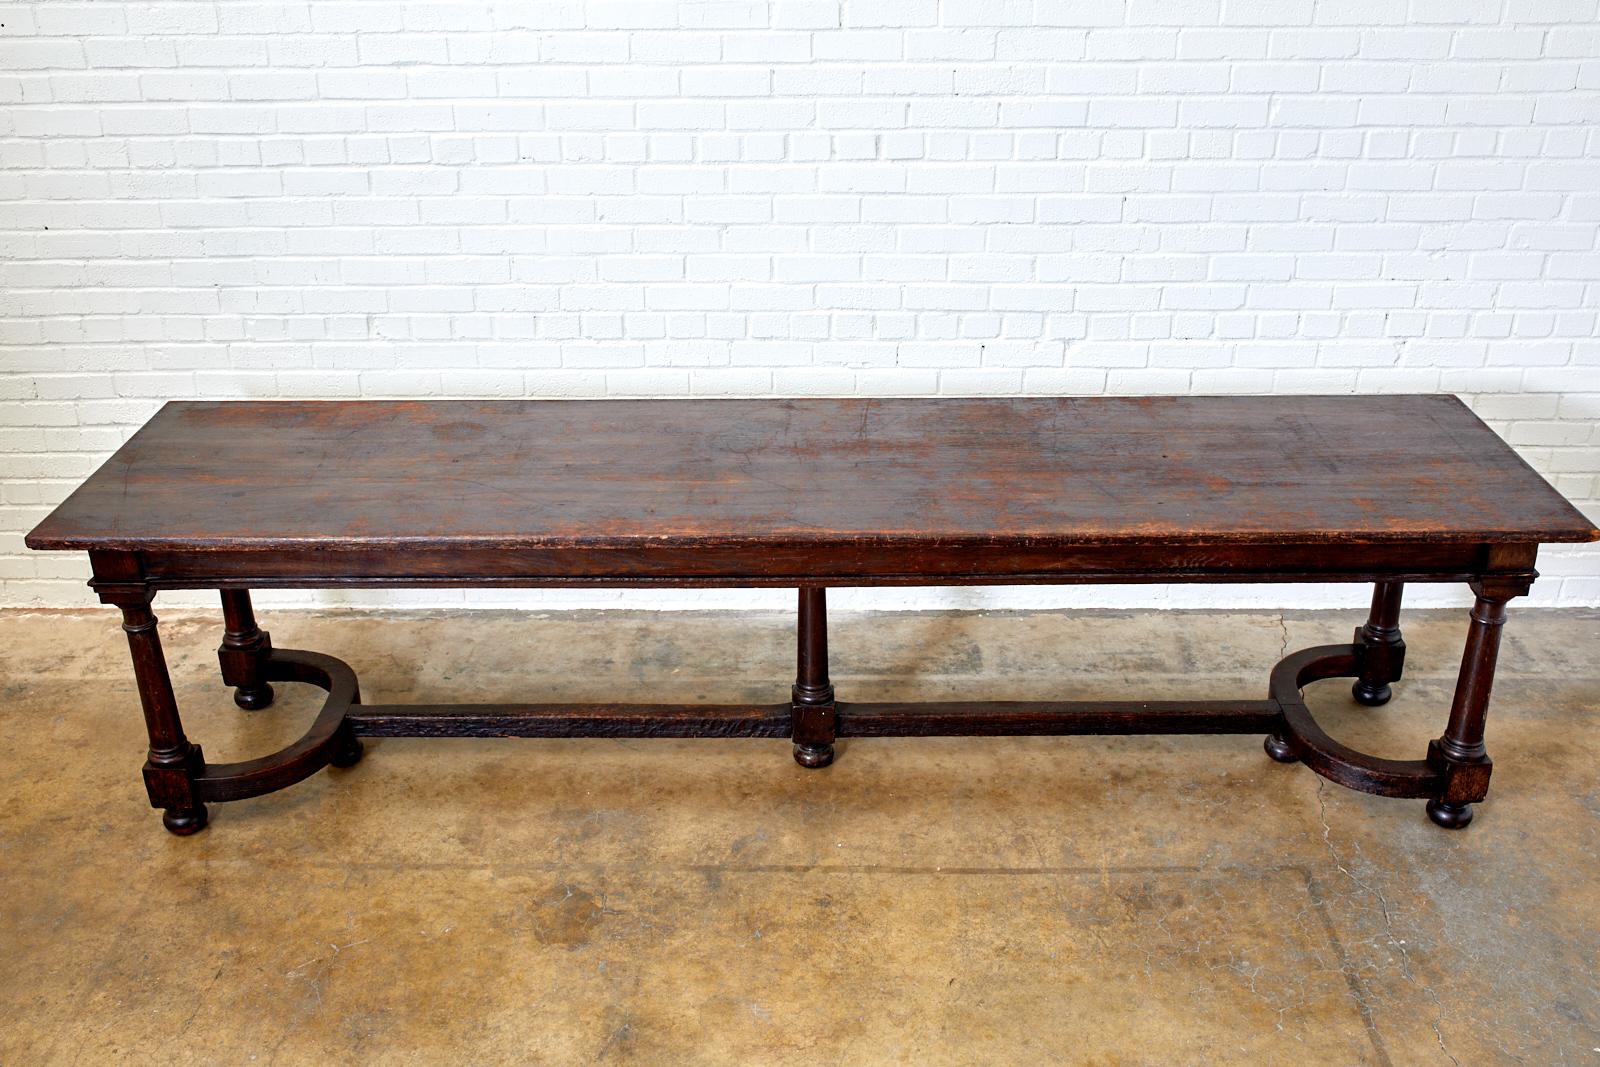 Grand 19th century English refectory, banquet, harvest or dining table. Handcrafted from oak featuring a 10 foot long removable three plank top. The shaped apron is supported by five thick, turned legs with blocks on the bottom and ending with bun